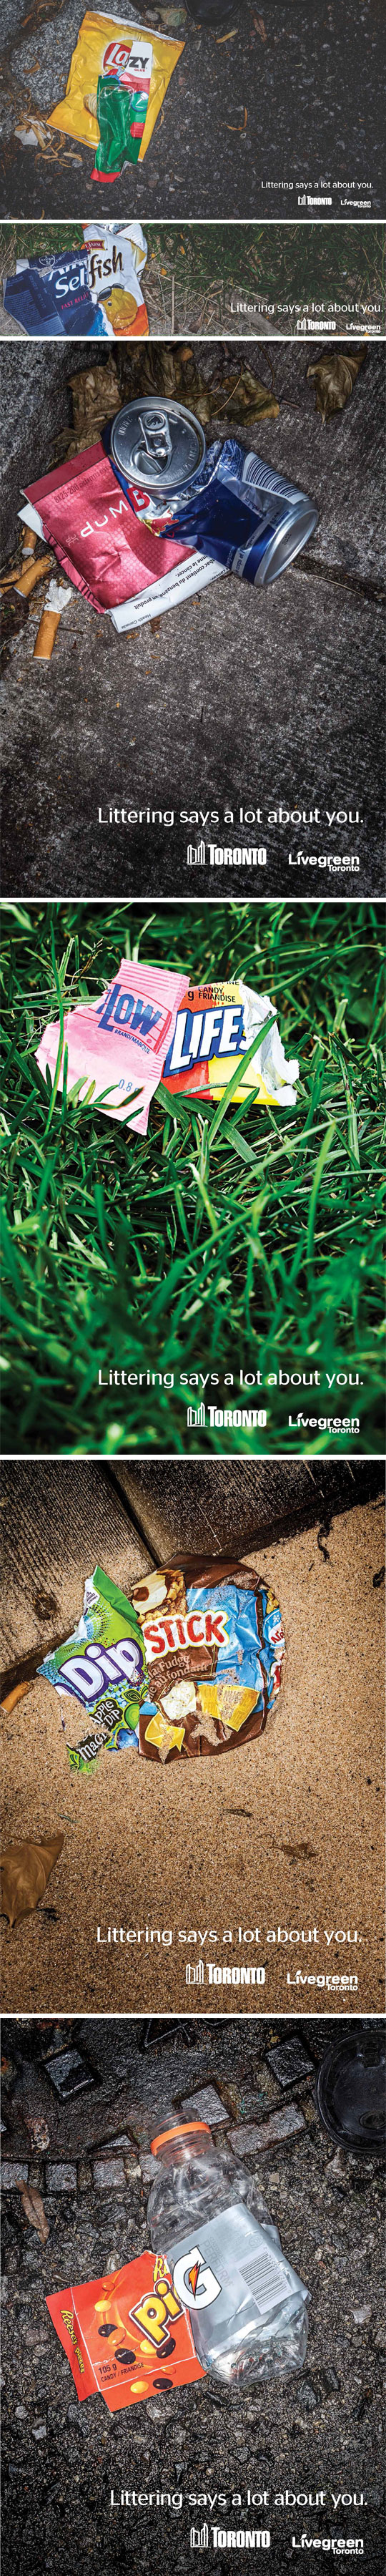 Littering says a lot about you.